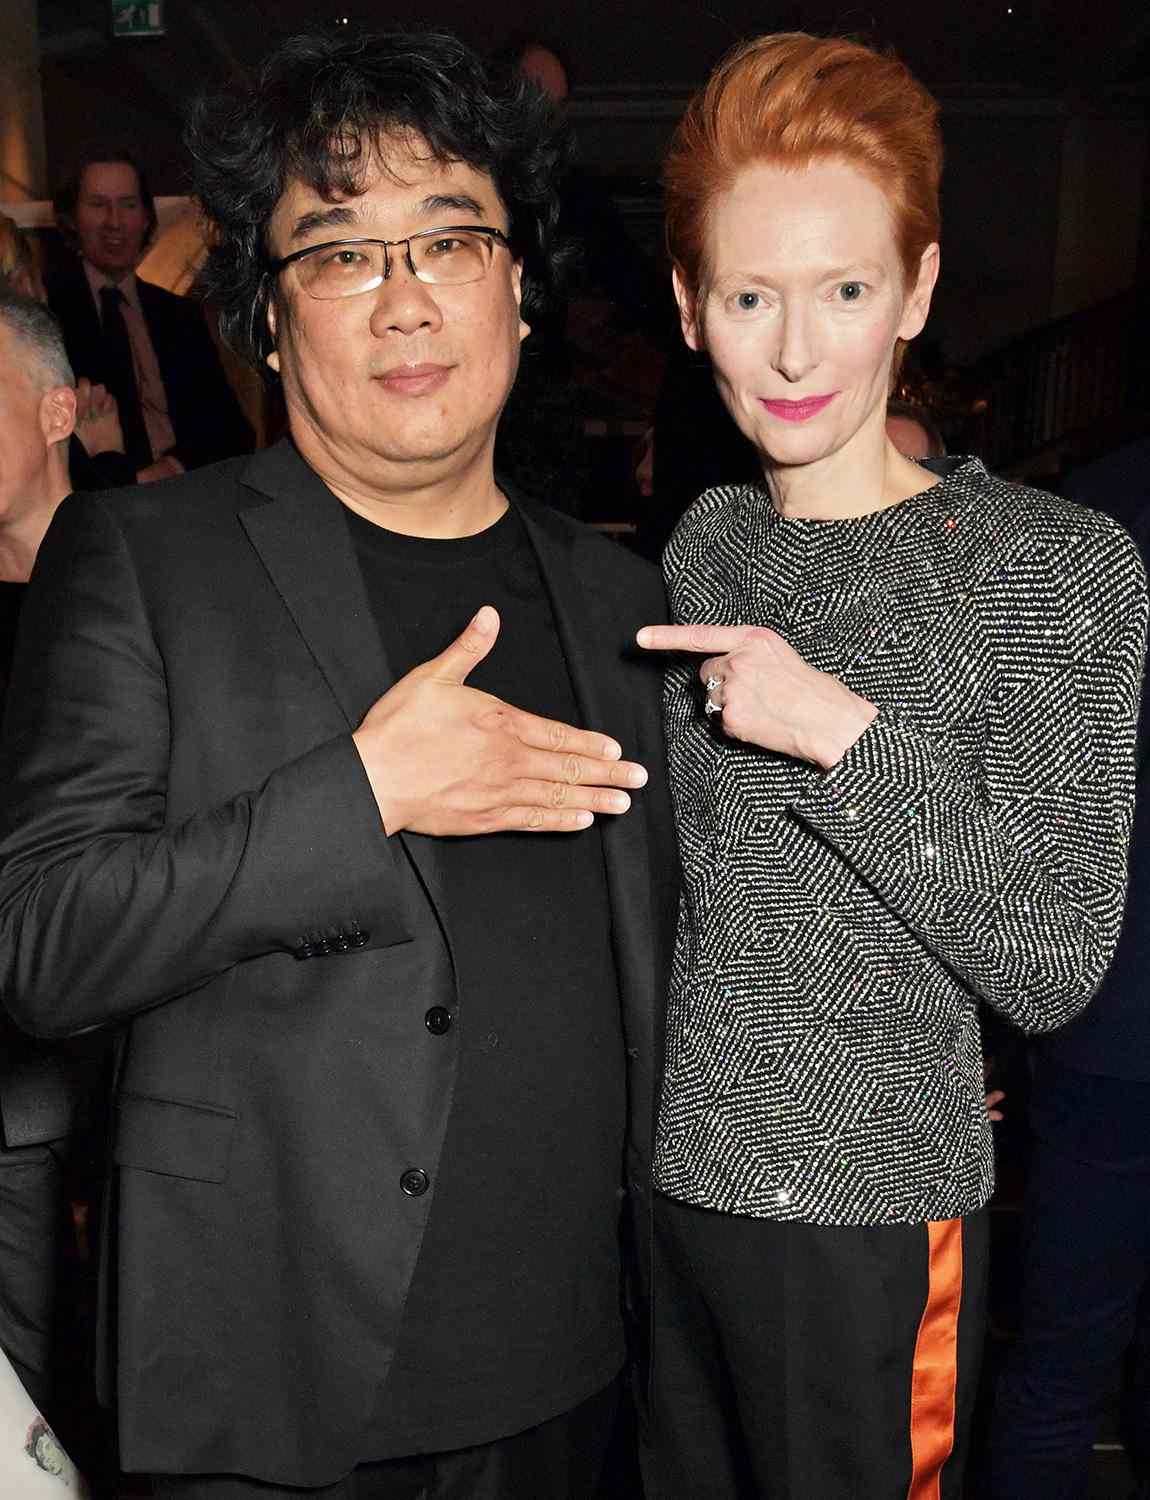 Bong Joon-ho and Tilda Swinton attend the BFI Chairman's dinner awarding Tilda Swinton with a BFI Fellowship at Rosewood London on March 2, 2020 in London, England